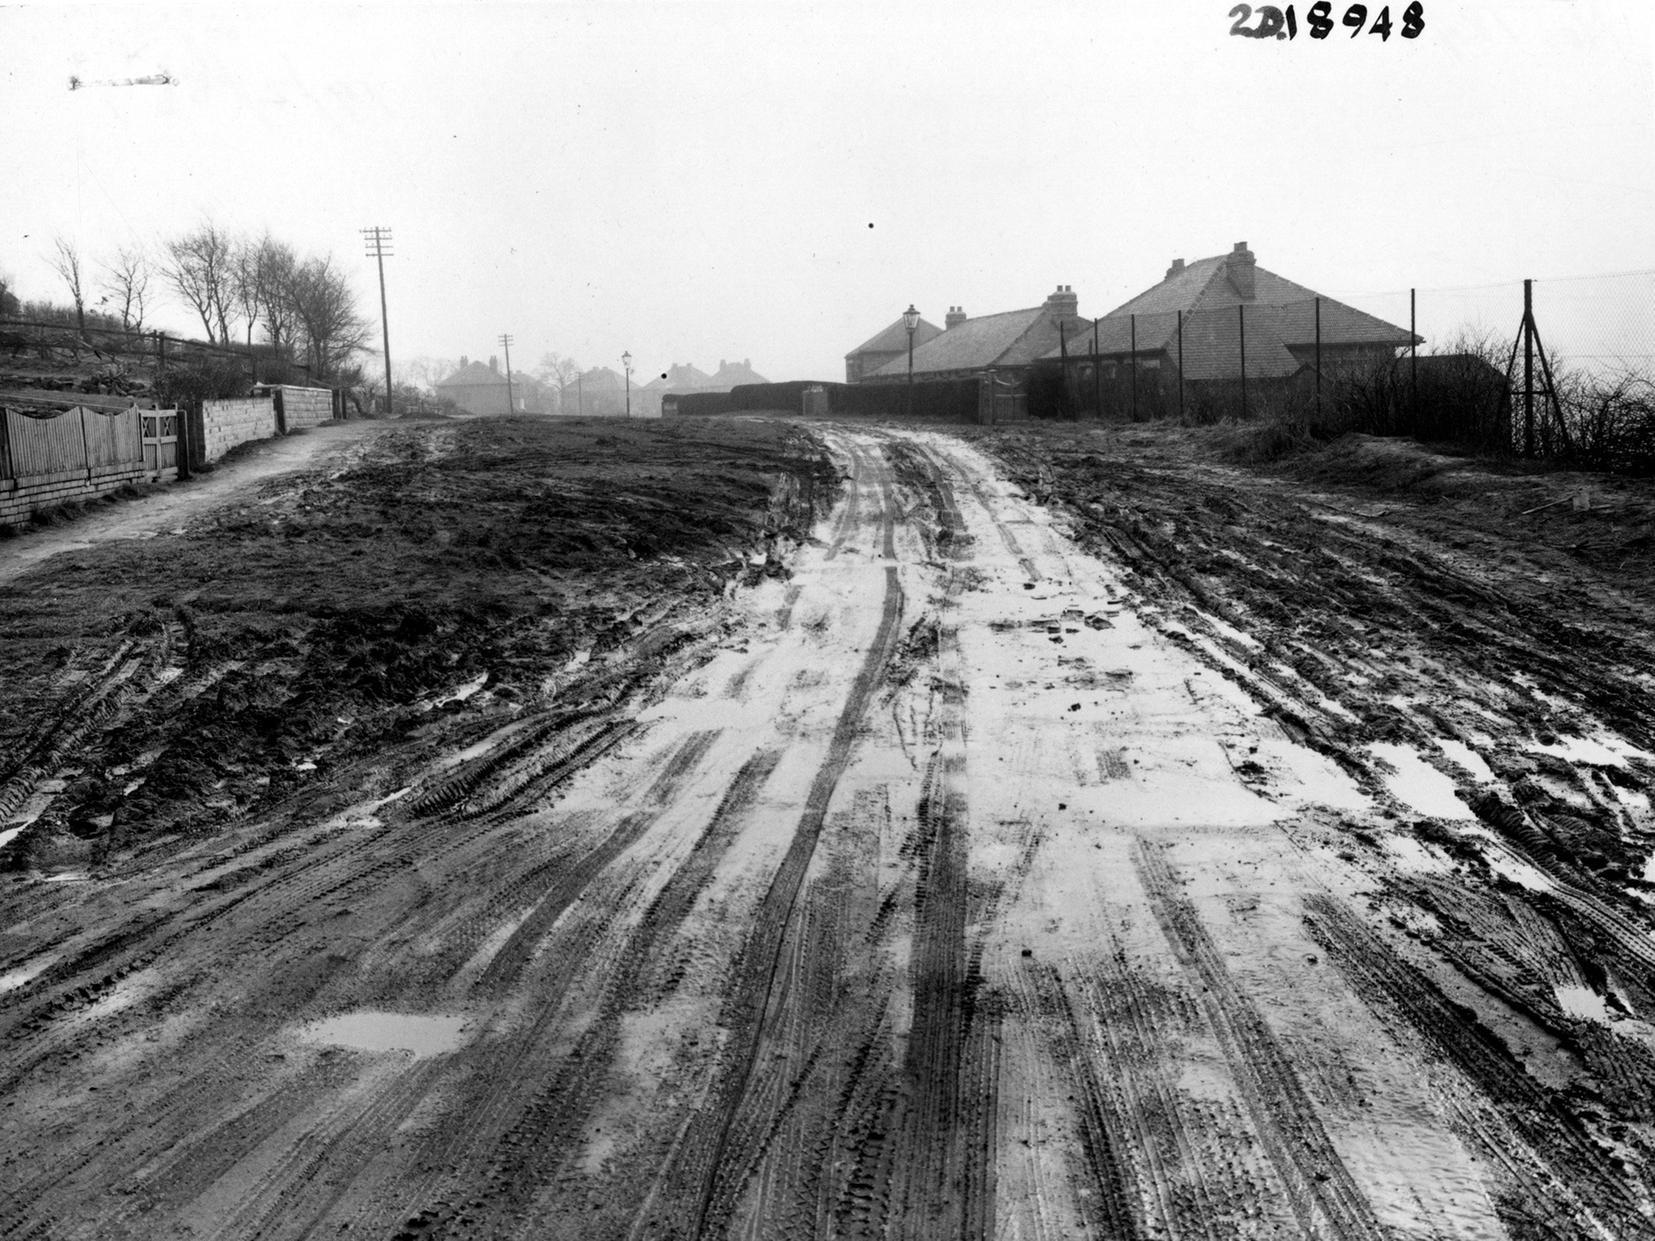 Blue Hill Lane in Wortley from near the junction with Tong Road. The picture shows the unmade, muddy surface with tyre tracks. The roofs of houses are visible on the right, beyond a wire mesh fence.